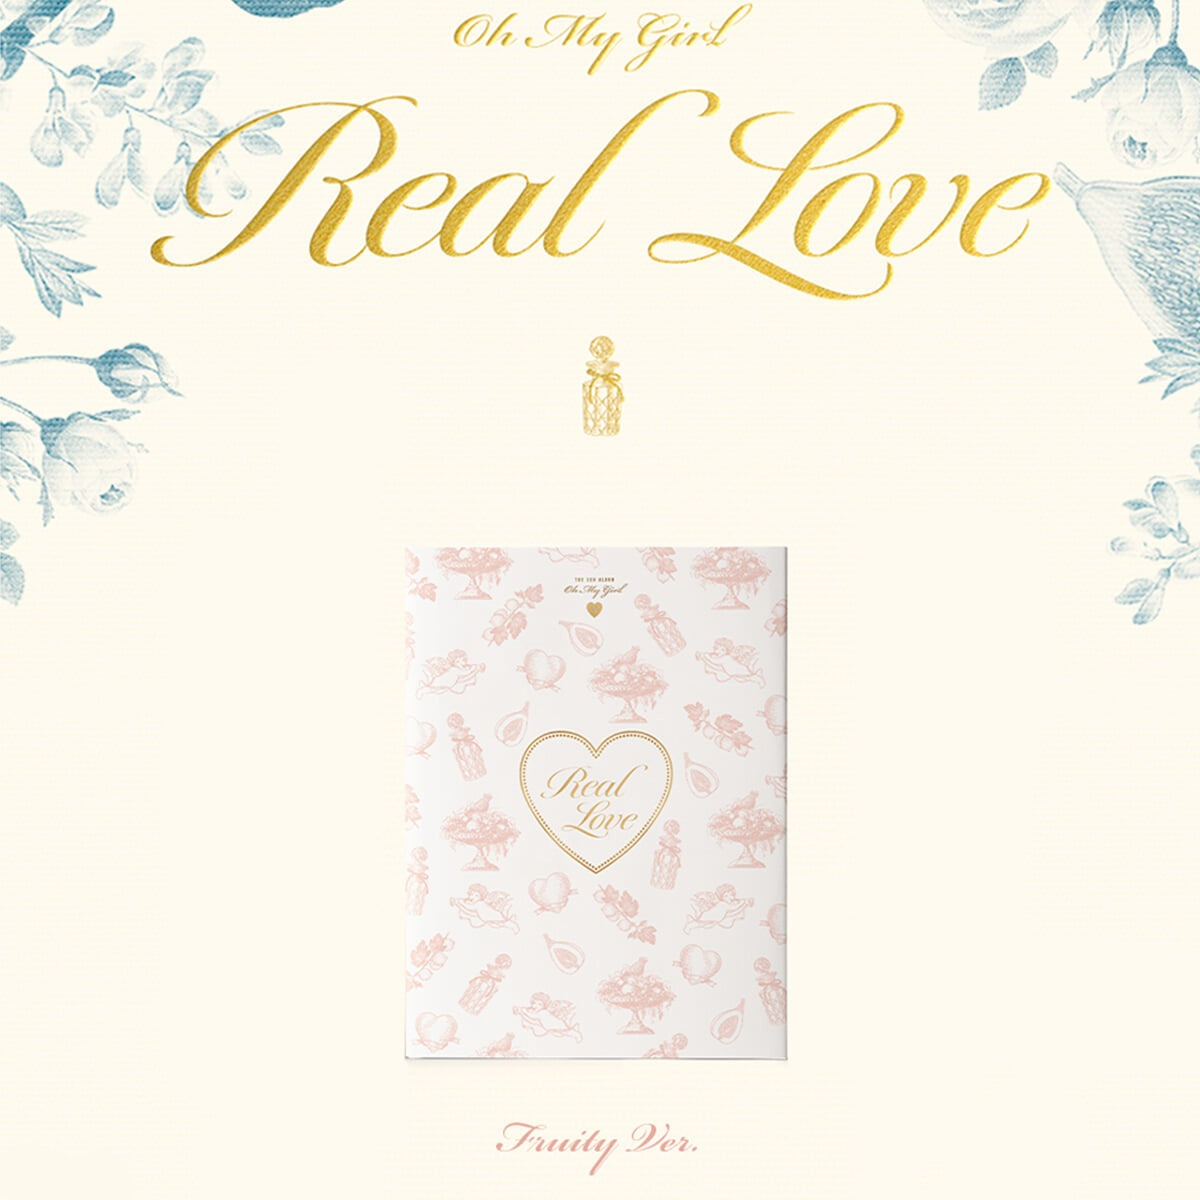 OH MY GIRL 2nd Album : Real Love